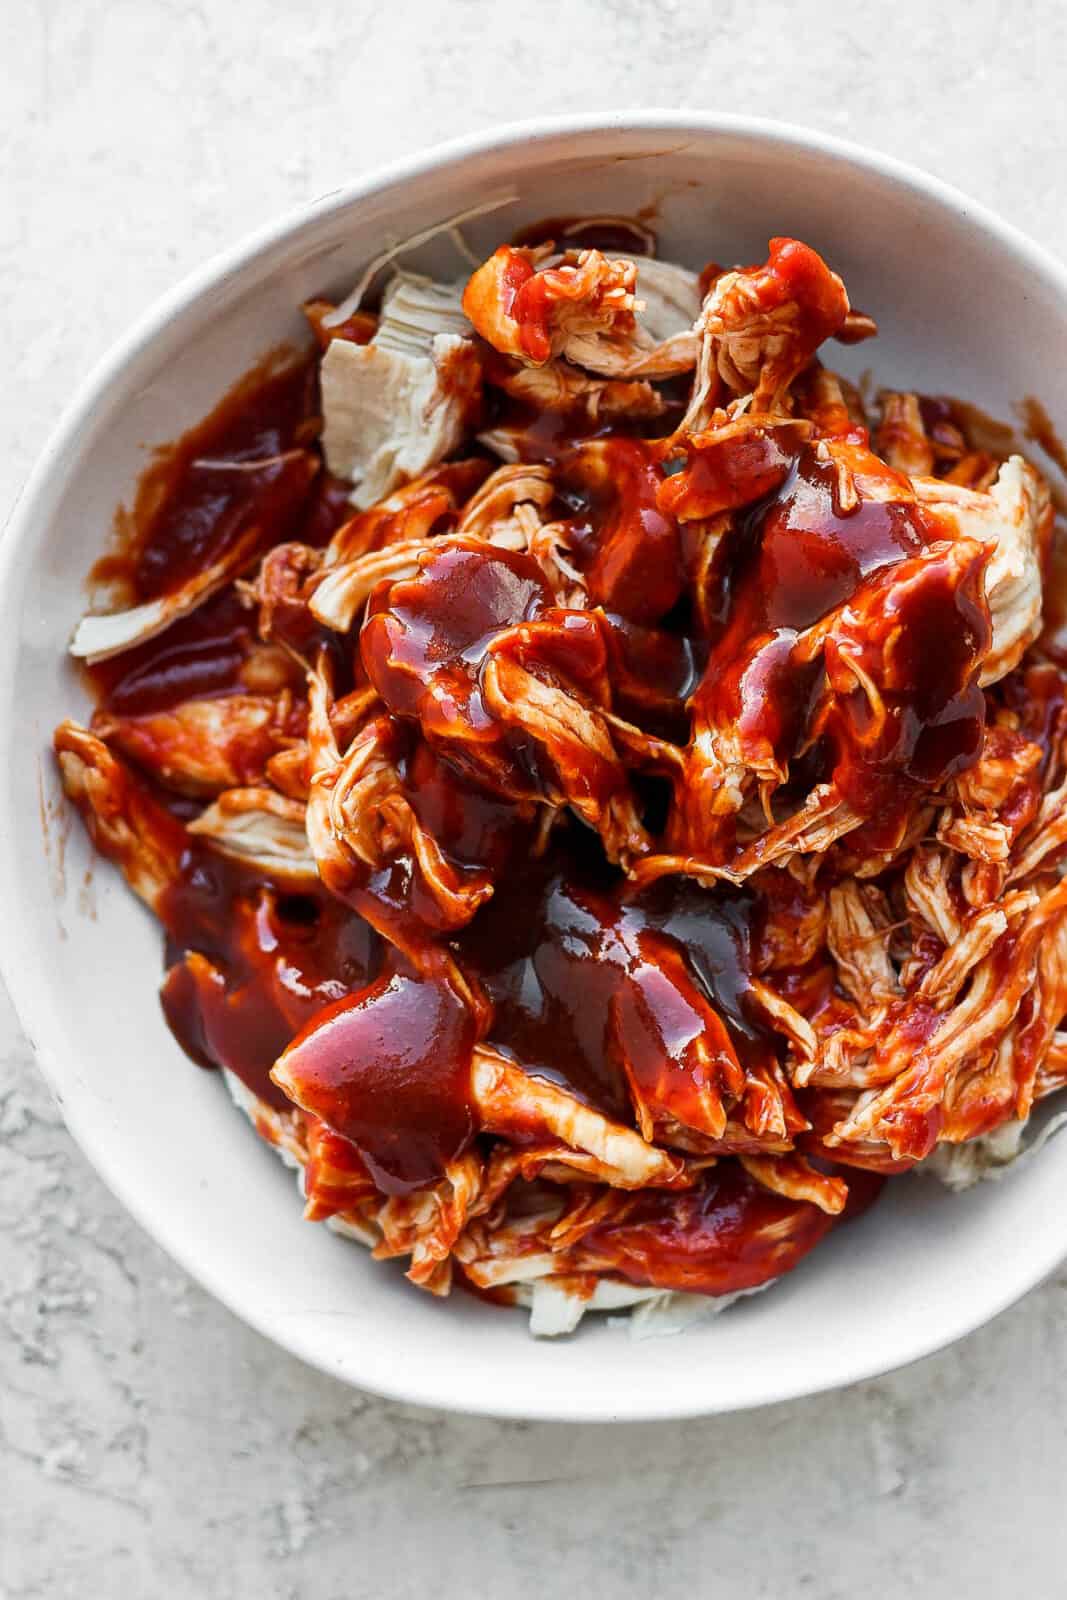 Shredded chicken topped with bbq sauce in a bowl.